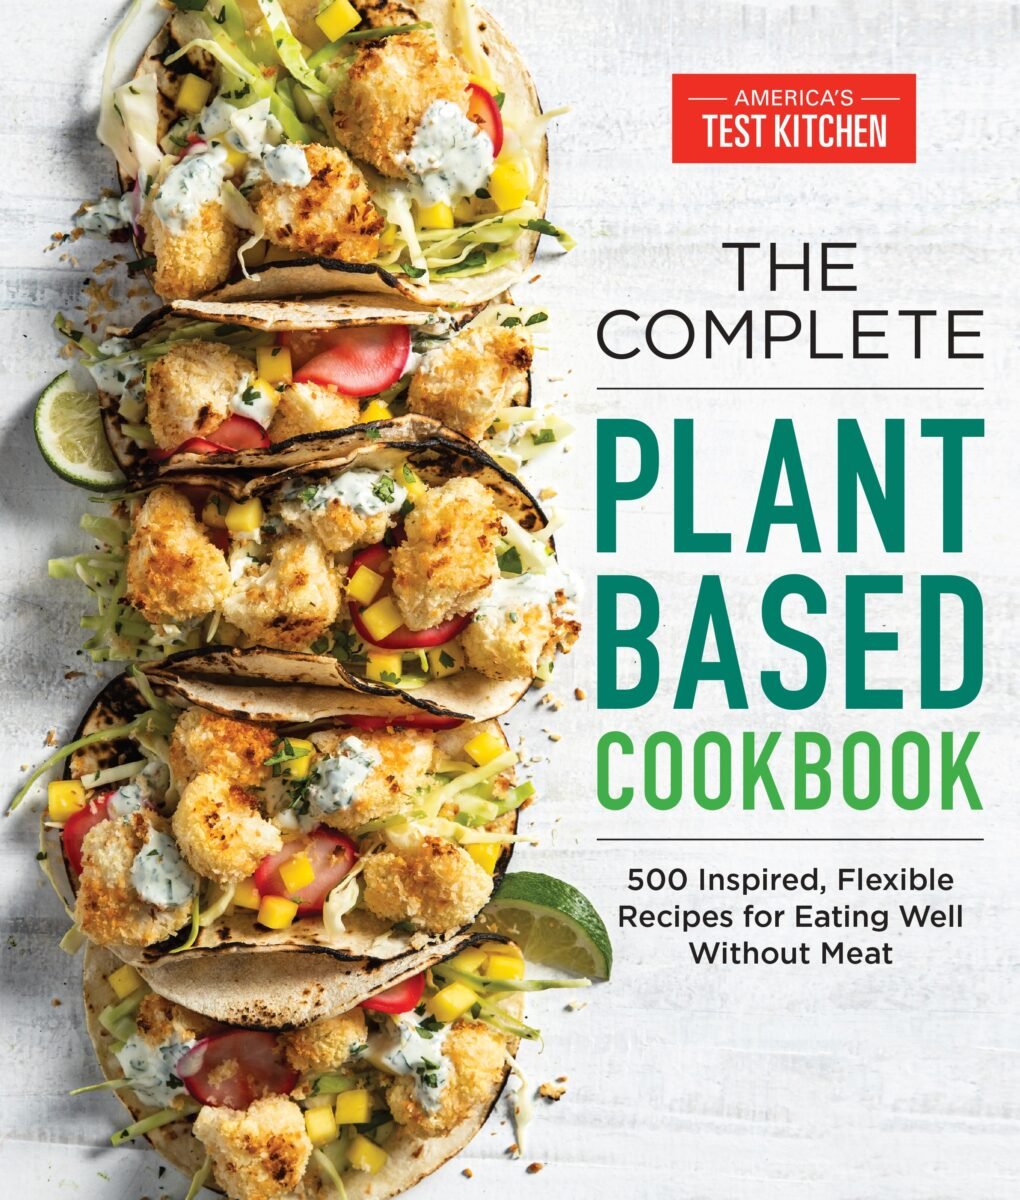 The cover of vegan cookbook The Complete Plant-Based Cookbook, which comes from America's Test Kitchen